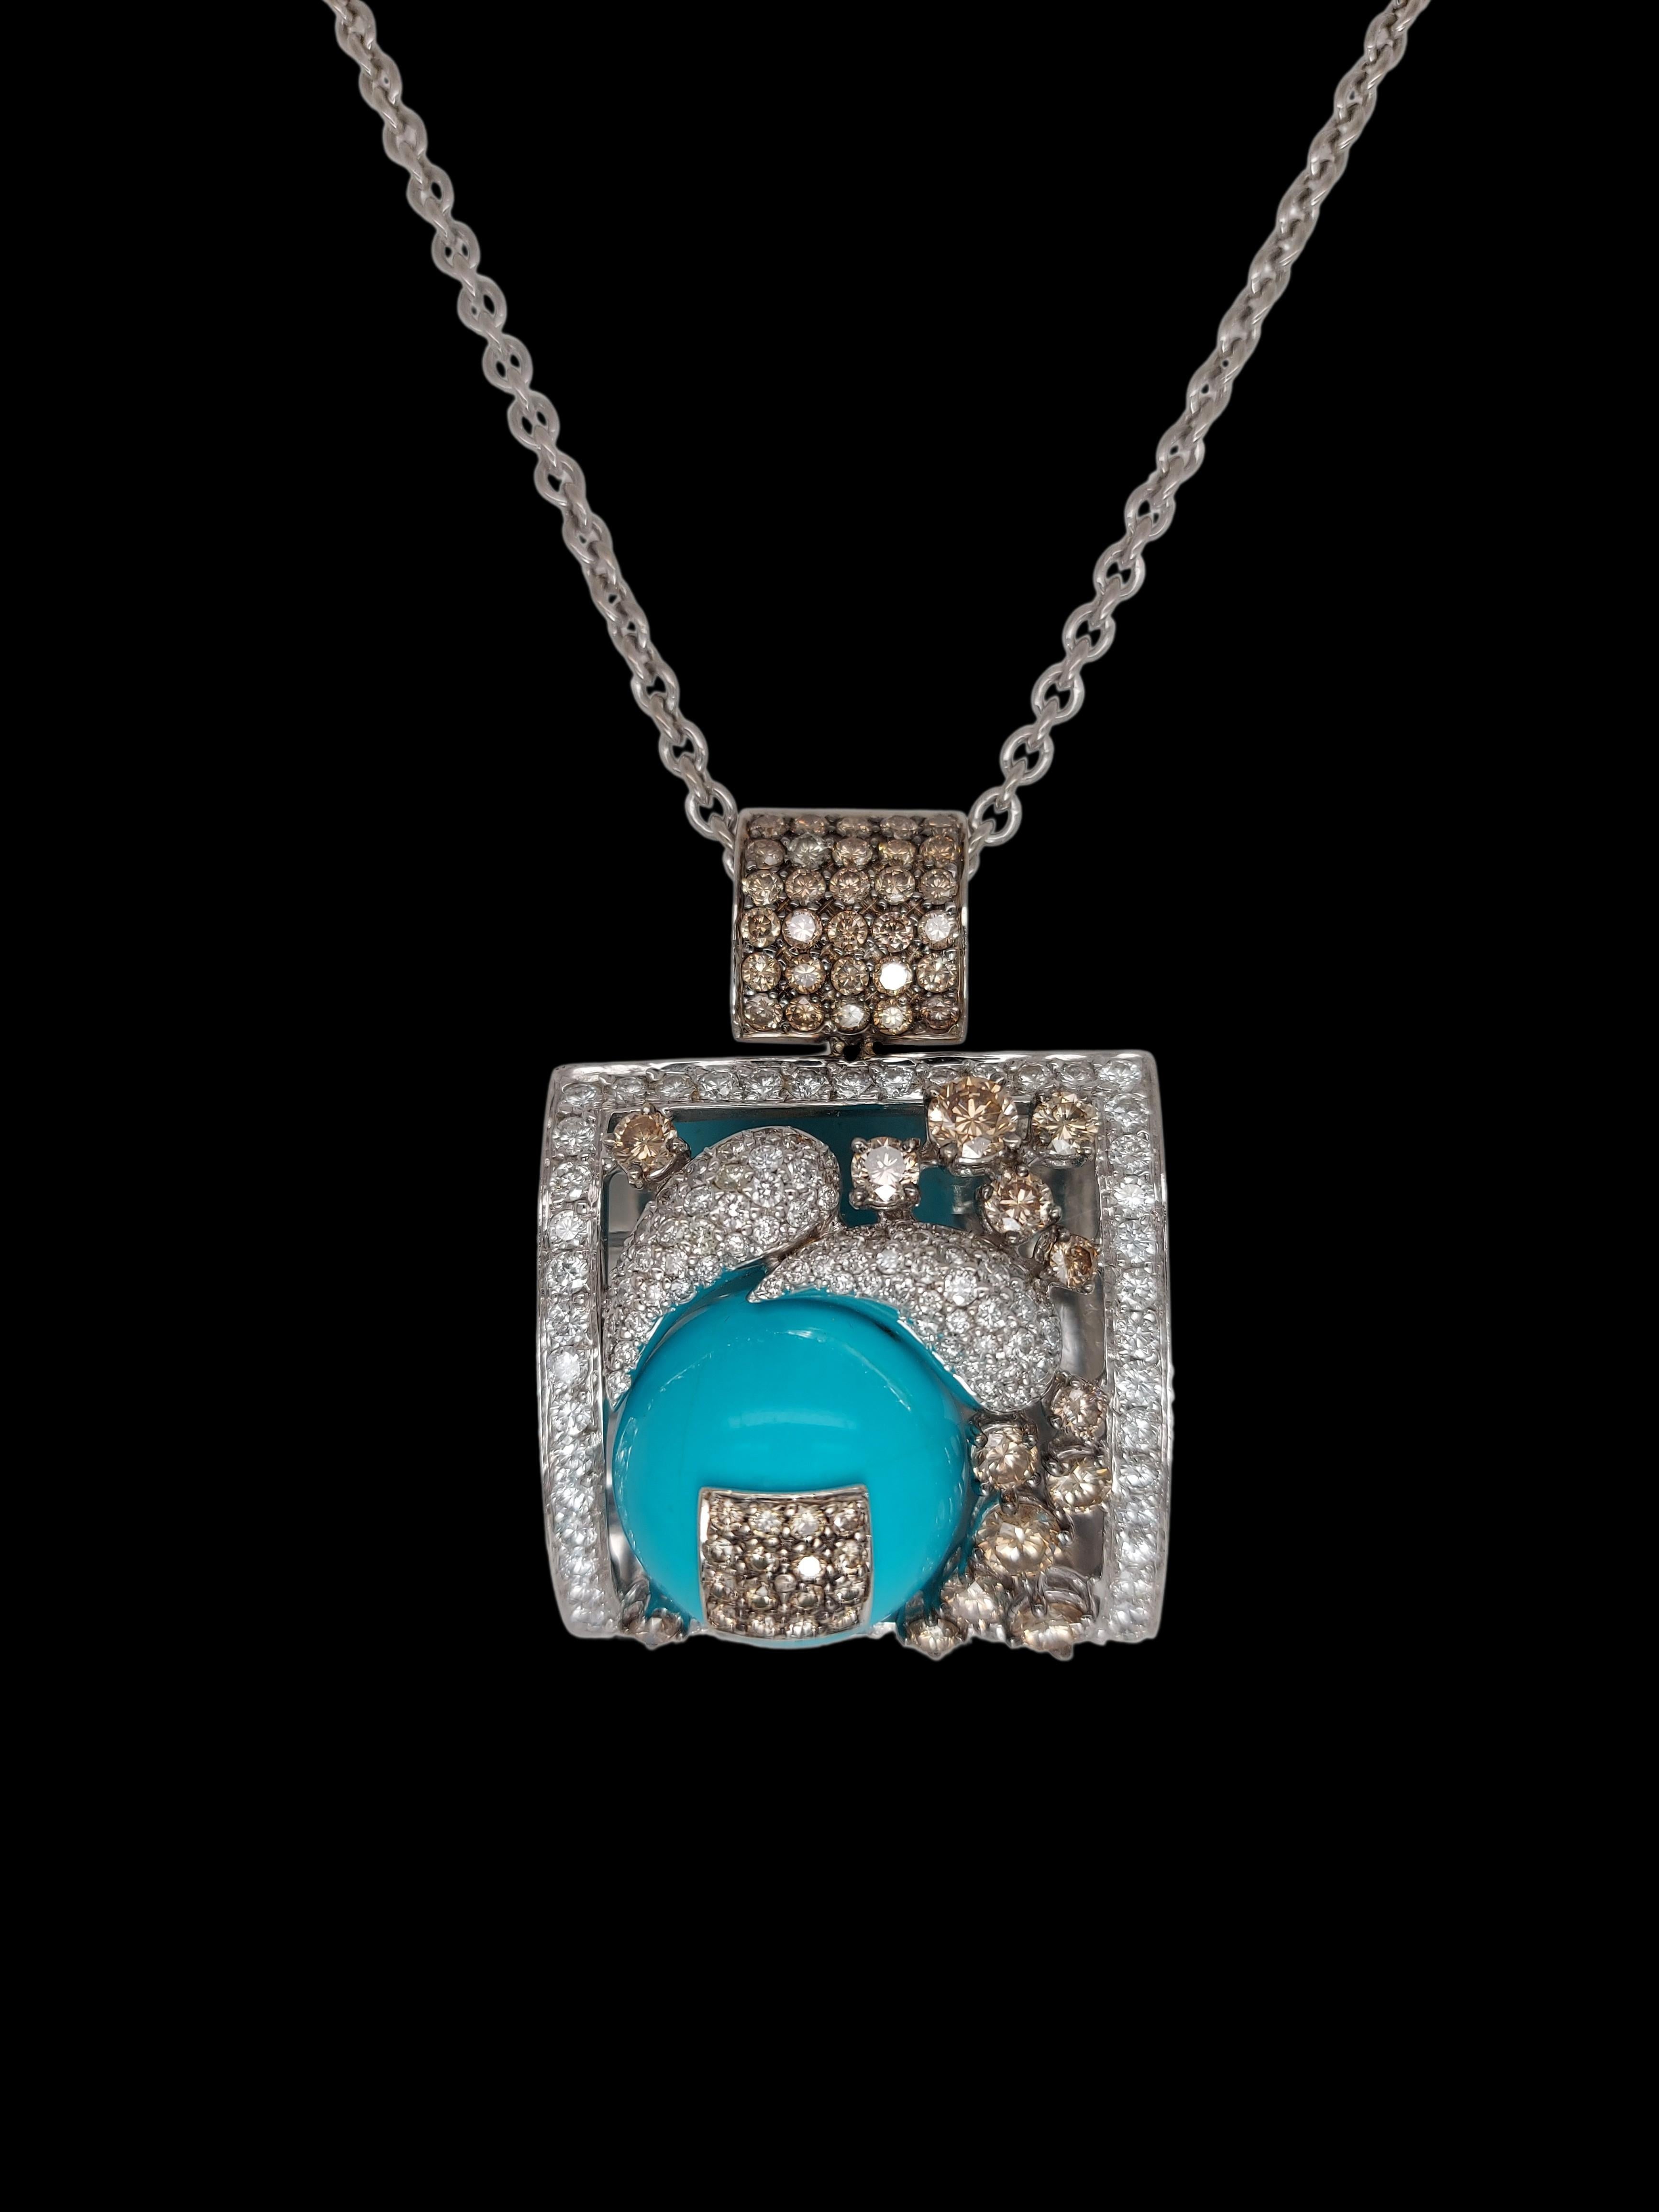 Artisan Stunning 18kt White Gold Pendant / Necklace with Turquoise and Diamonds